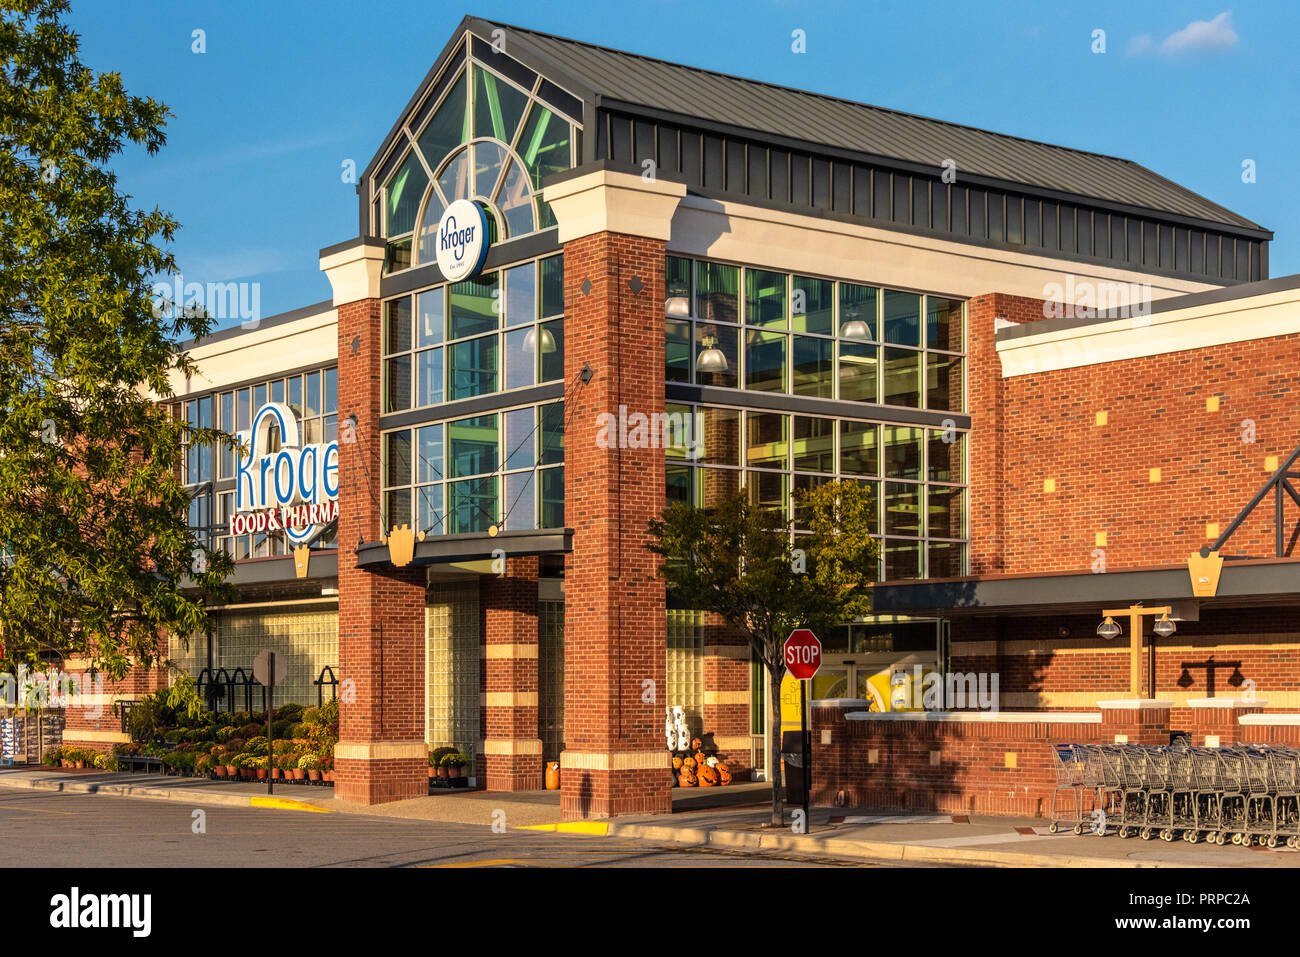 https://c8.alamy.com/comp/PRPC2A/kroger-food-pharmacy-store-in-metro-atlanta-georgia-kroger-is-the-worlds-largest-supermarket-chain-in-terms-of-annual-revenue-usa-PRPC2A.jpg